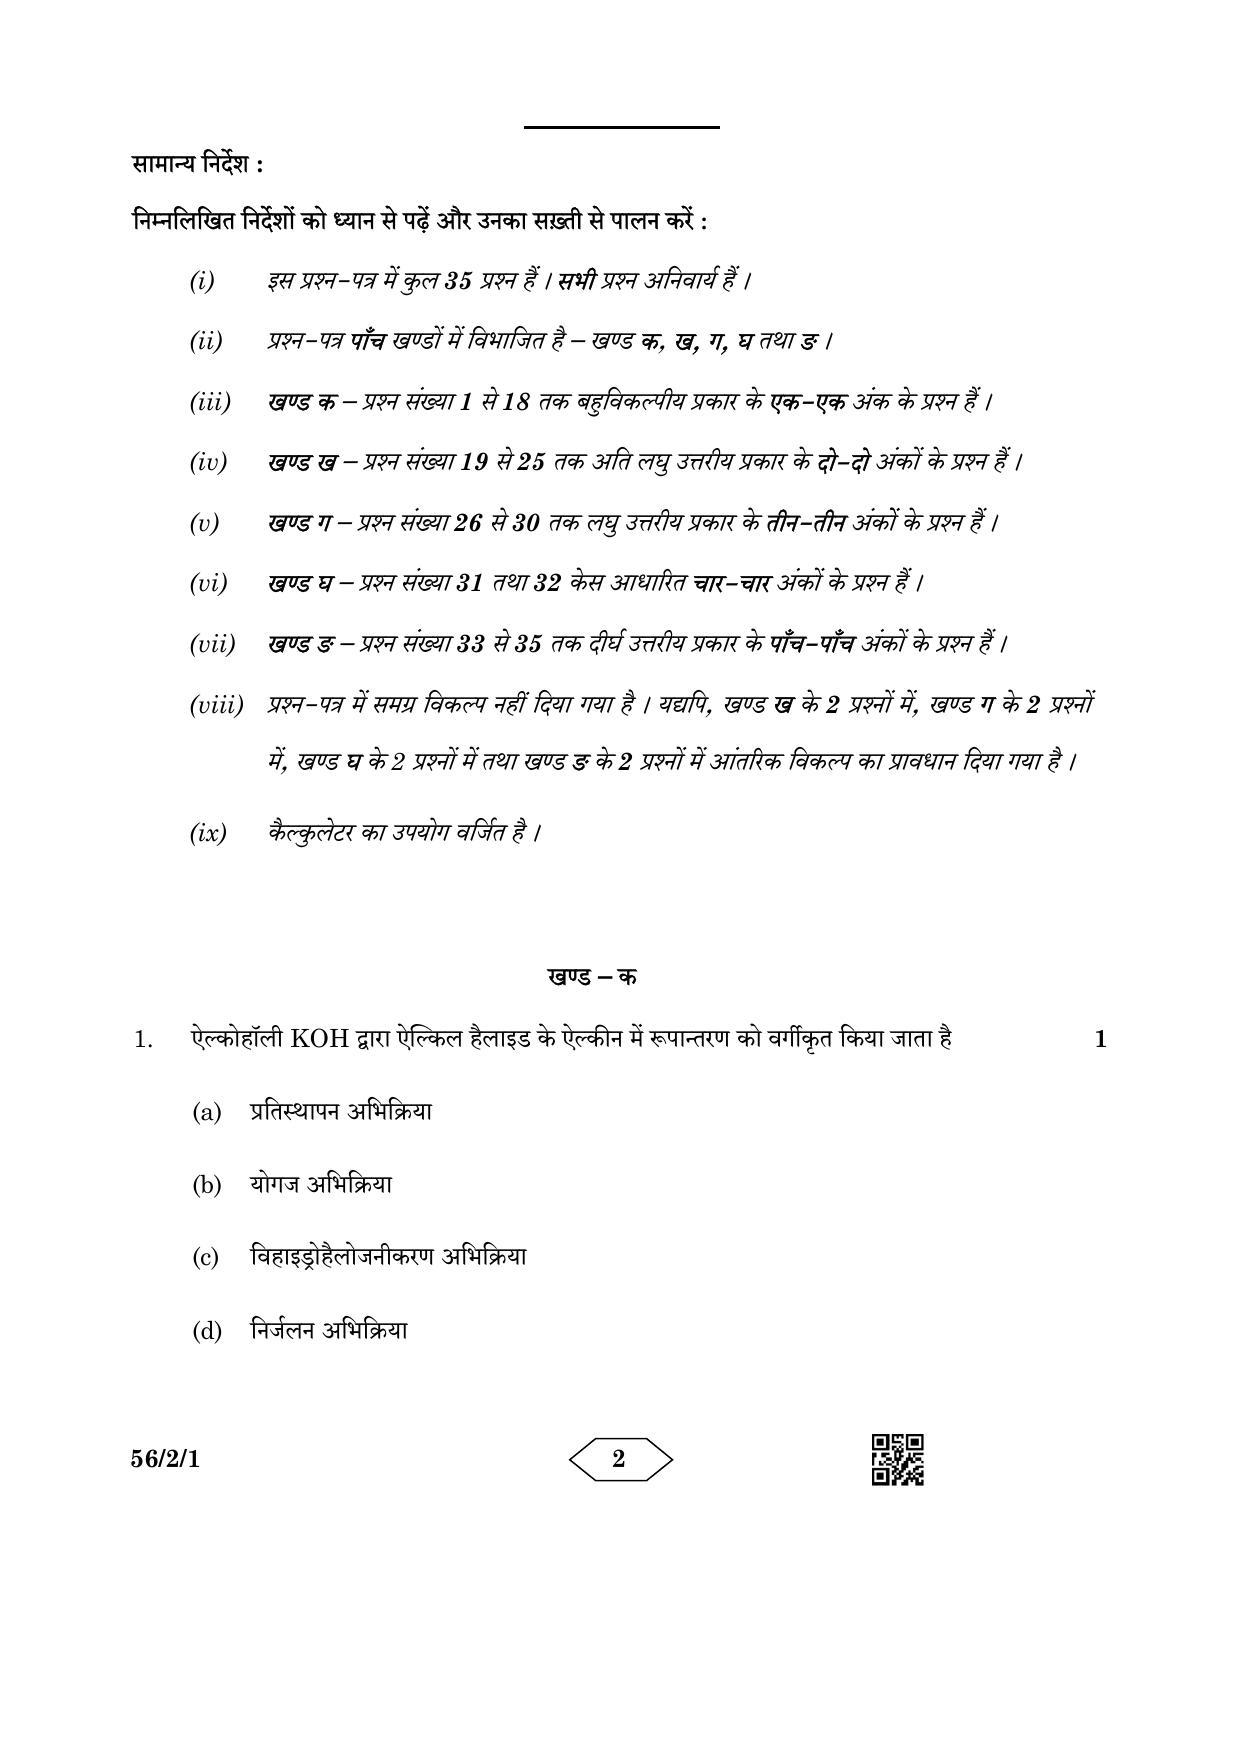 CBSE Class 12 56-2-1 Chemistry 2023 Question Paper - Page 2